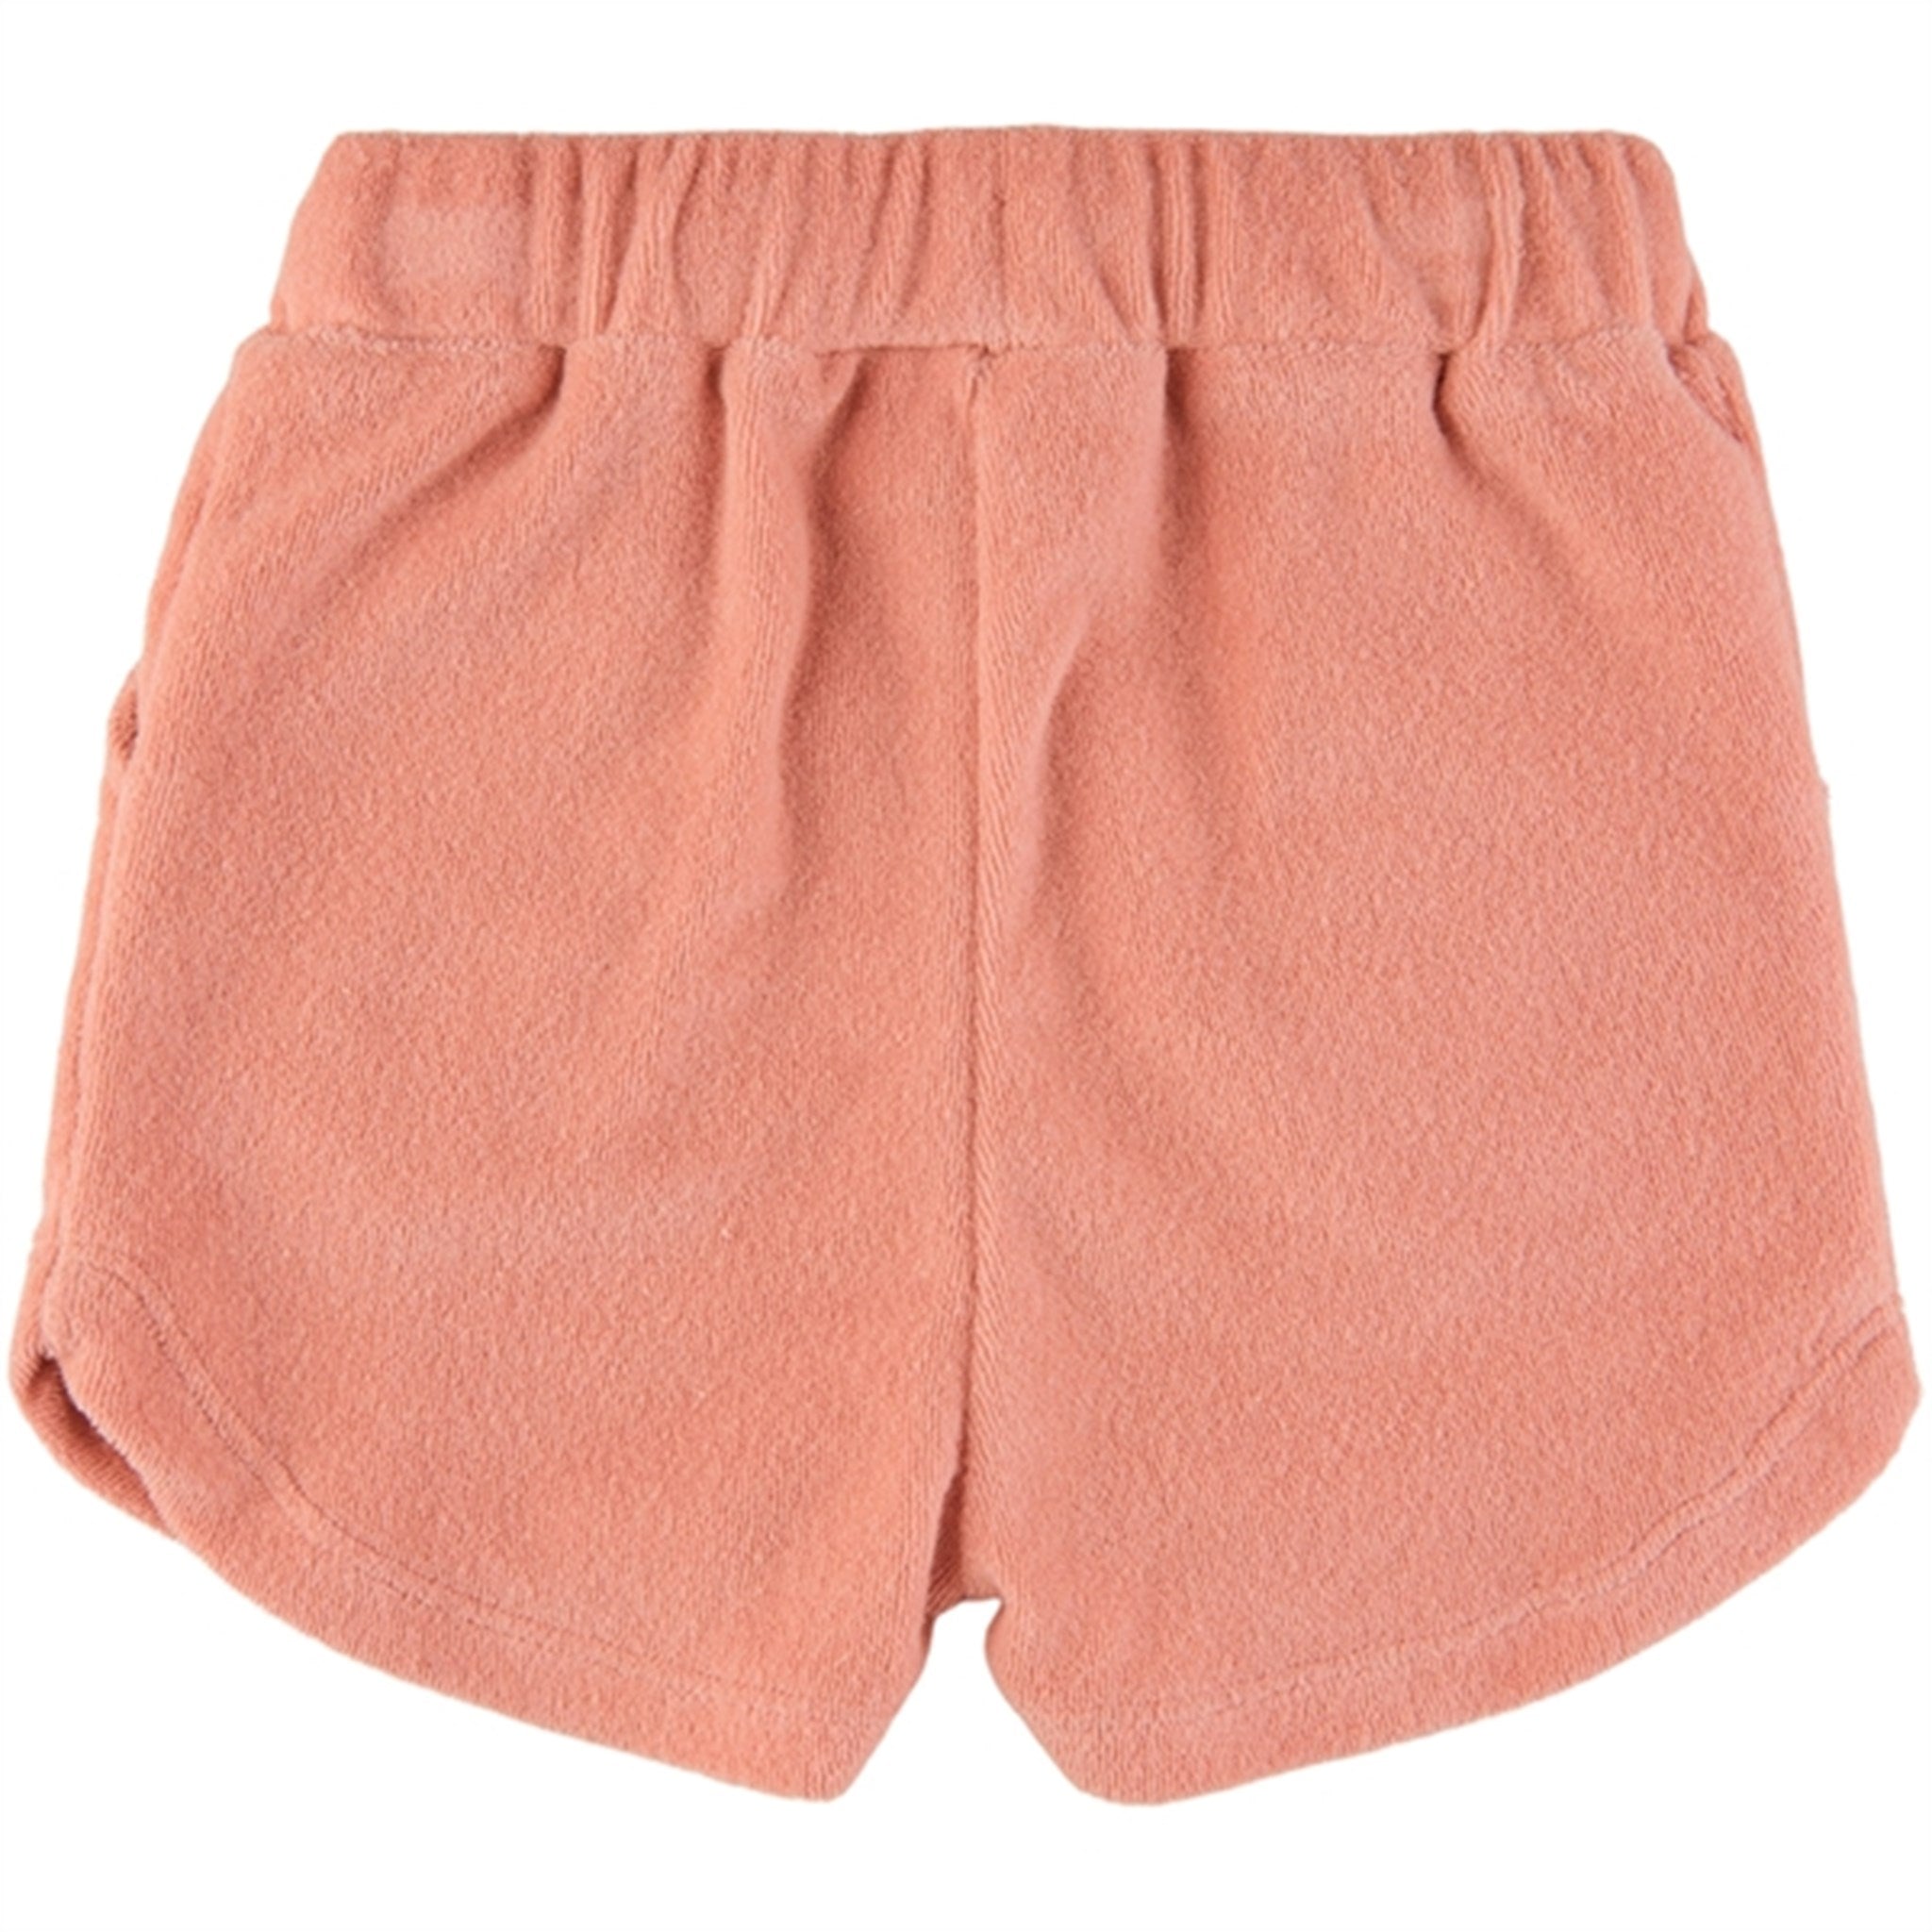 THE NEW Siblings Peach Beige Gertrud Terry Shorts 5